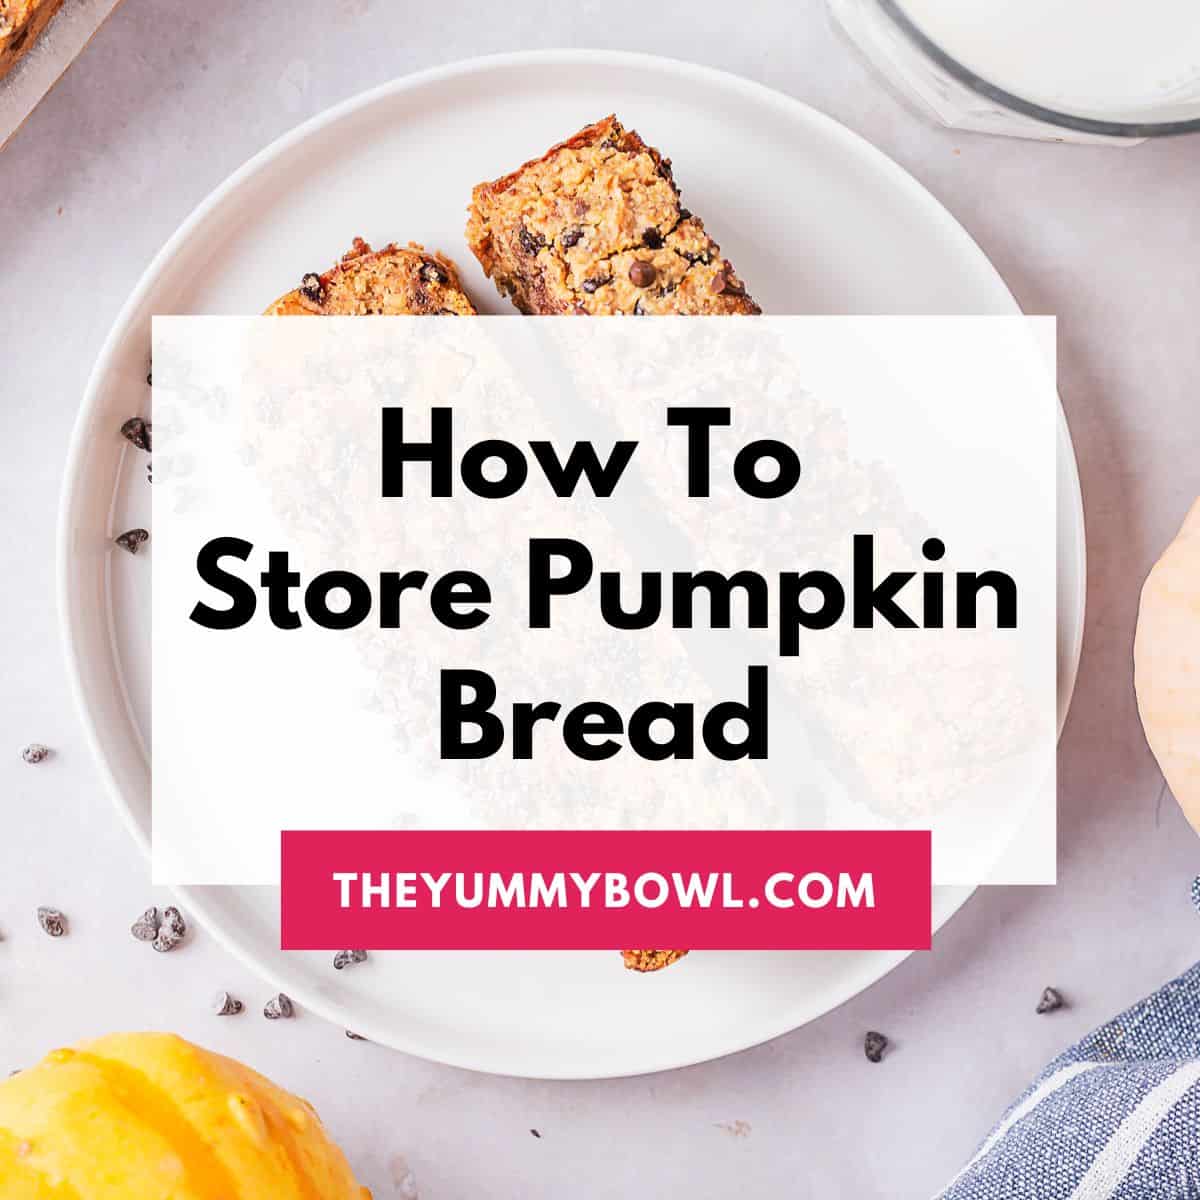 How To Store Pumpkin Bread